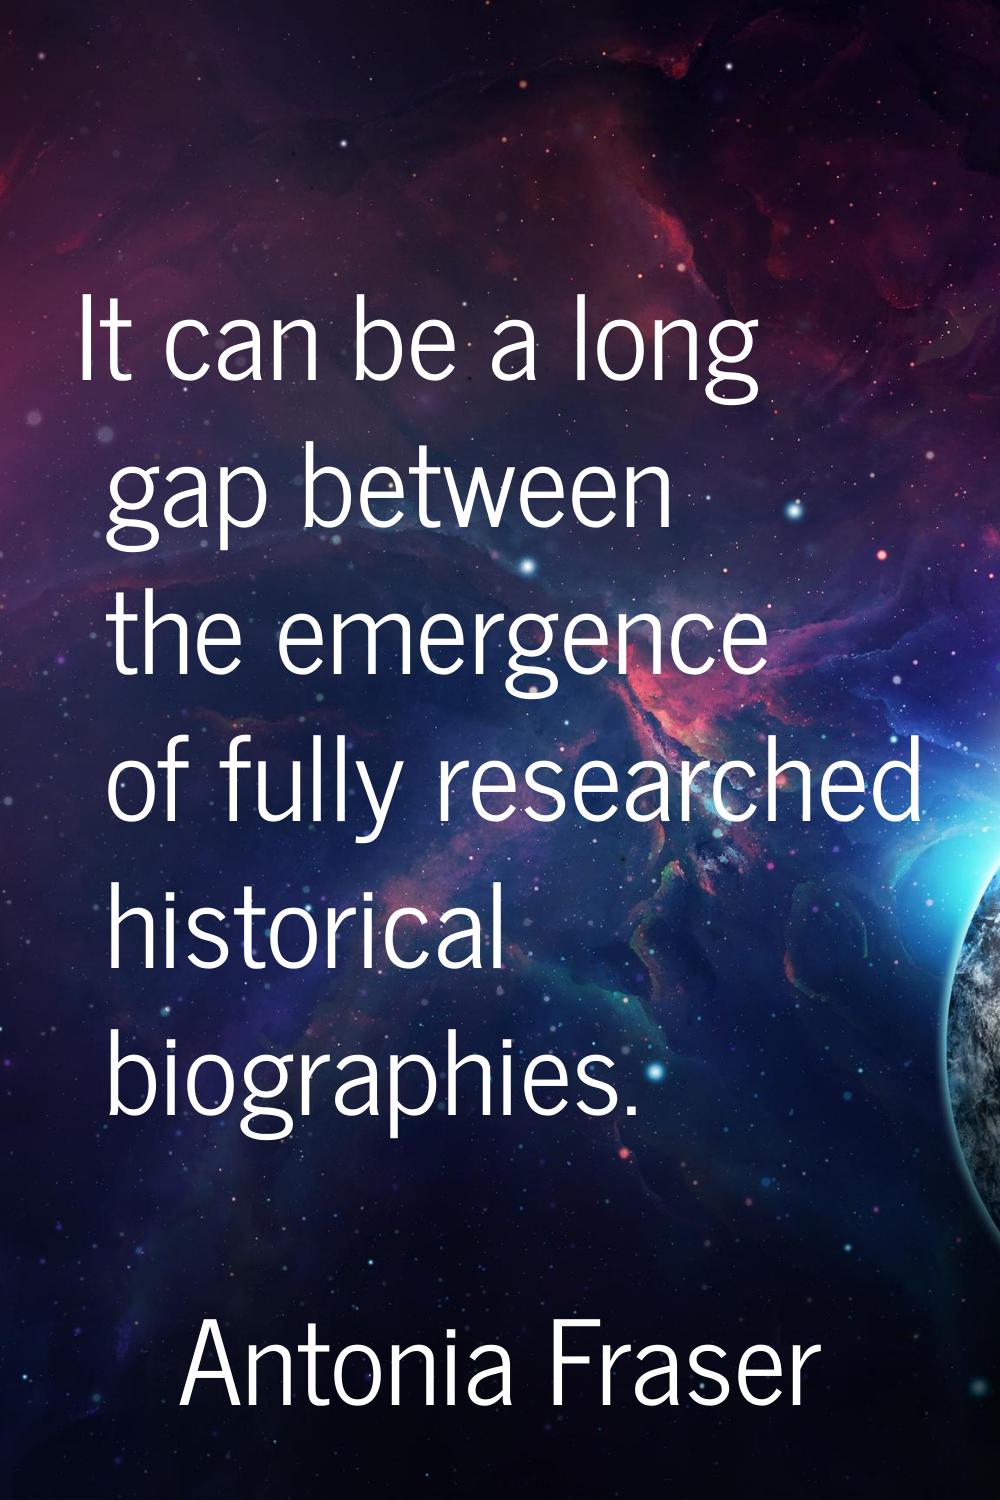 It can be a long gap between the emergence of fully researched historical biographies.